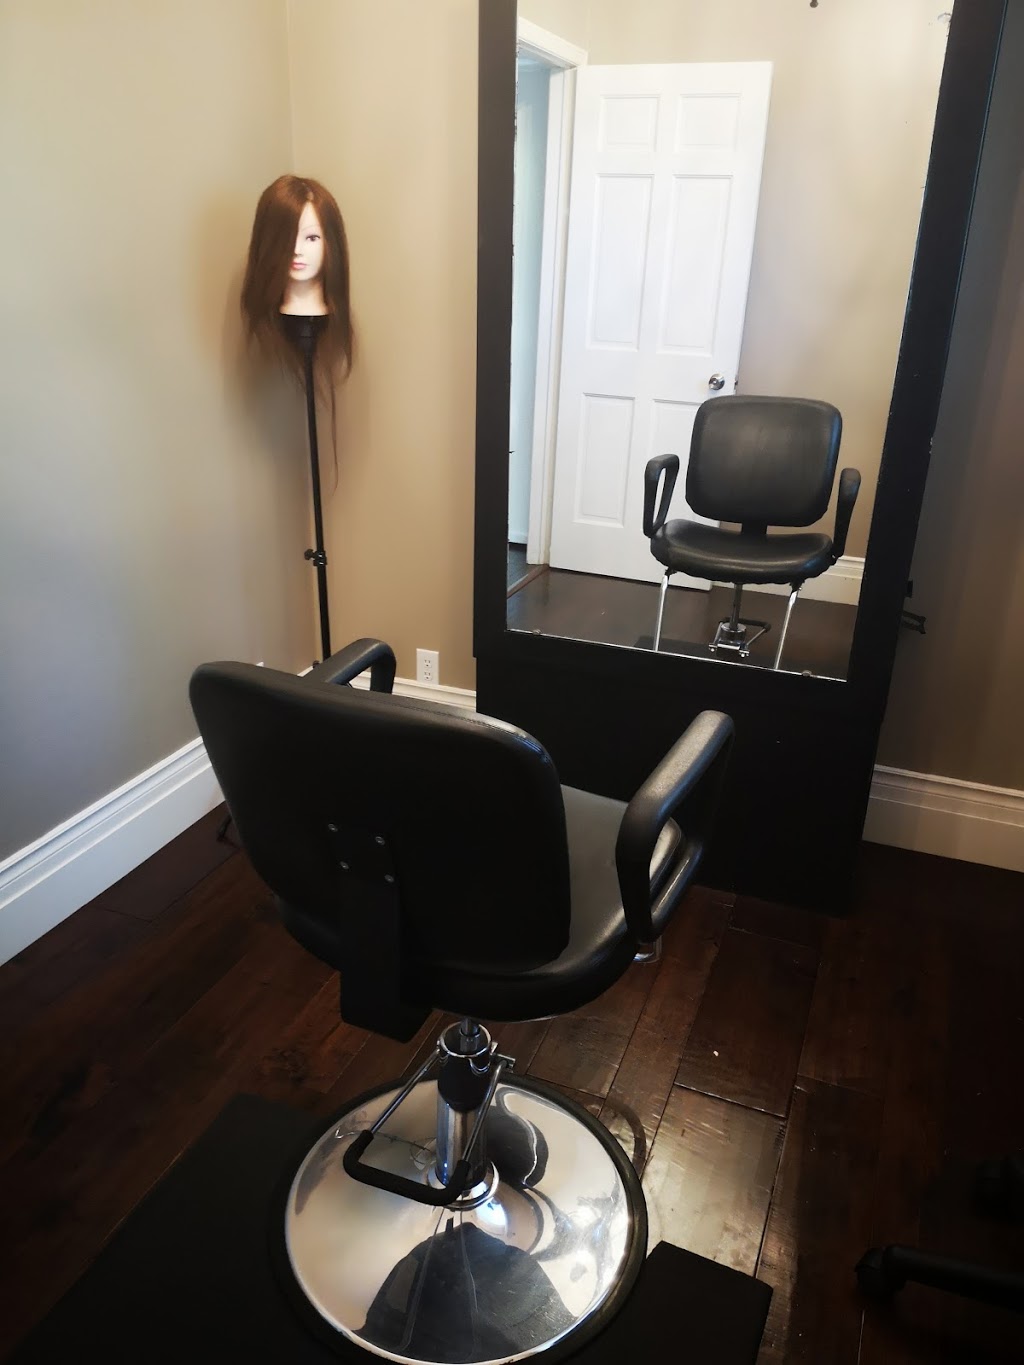 Hair Extensions by Tania | 166099 Cecilia St, La Salette, ON N0E 1H0, Canada | Phone: (226) 218-8128